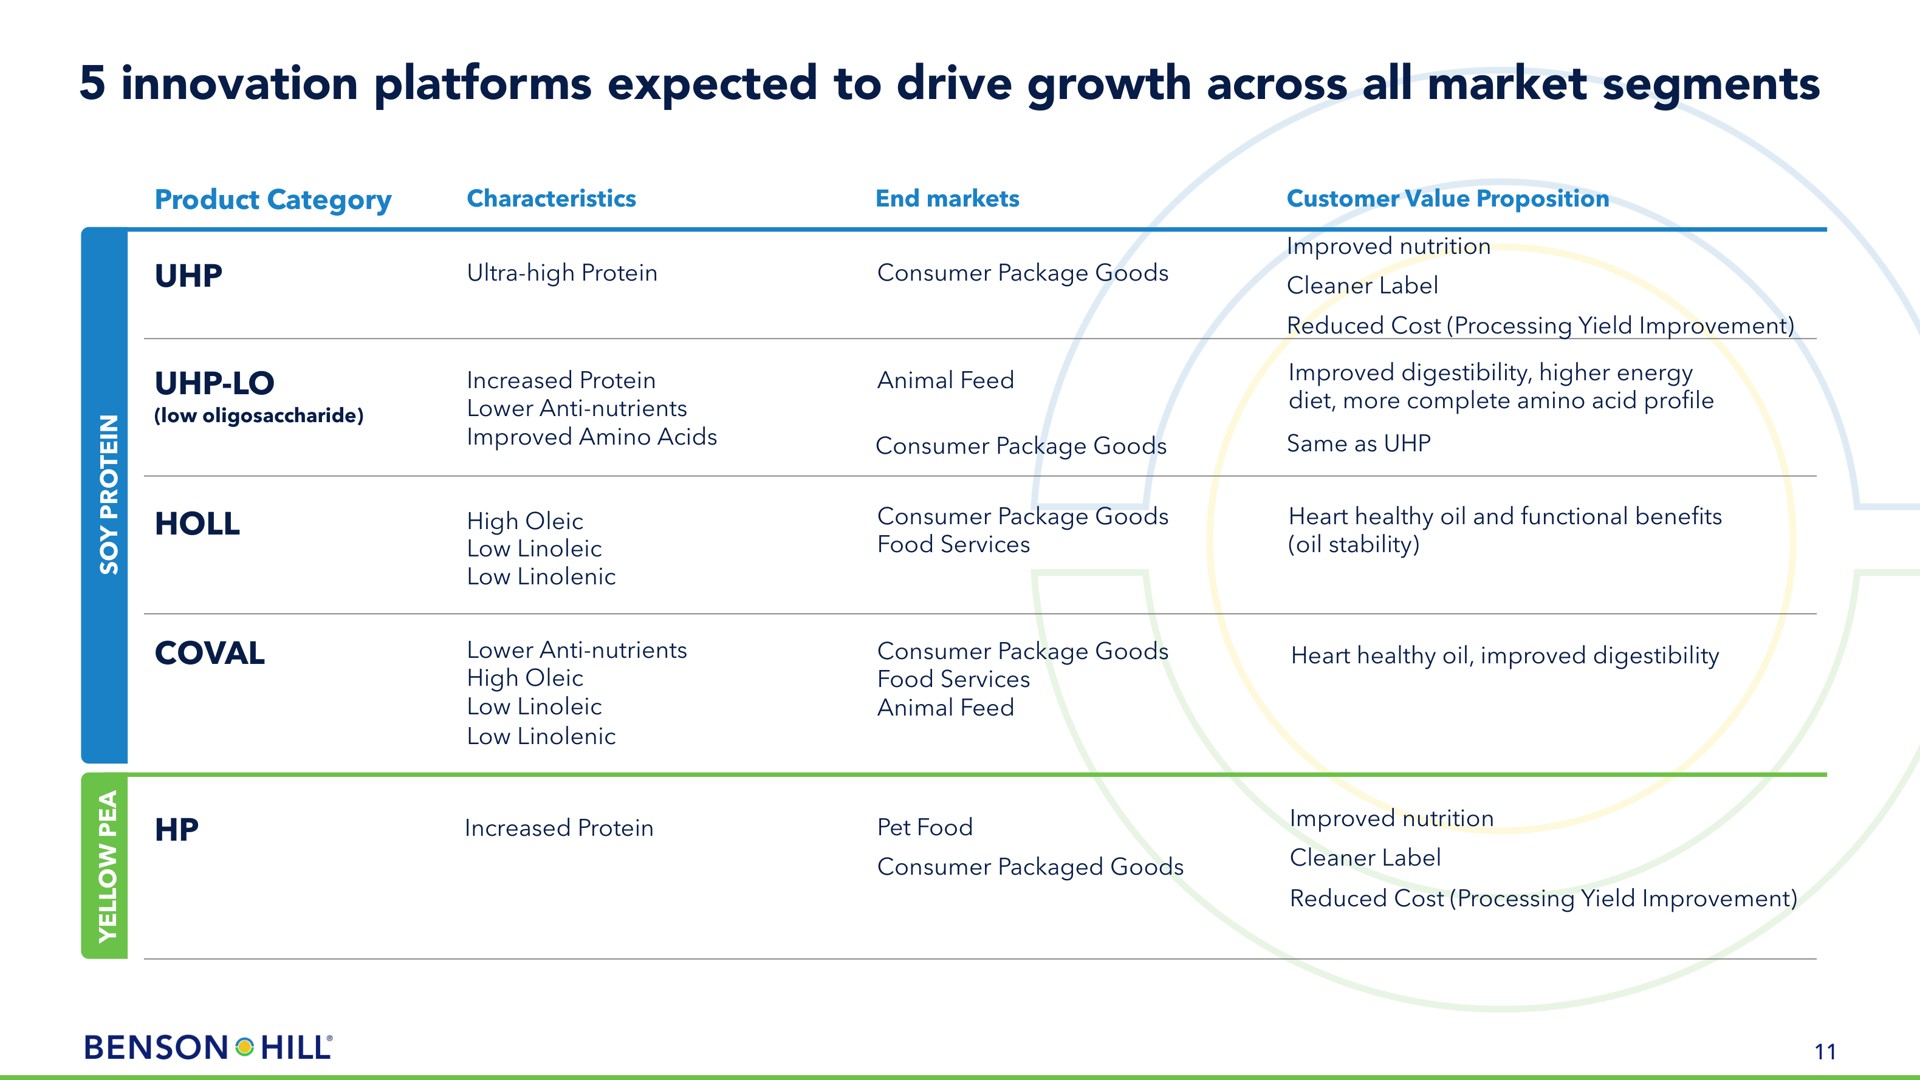 innovation platforms expected to drive growth across all market segments | Benson Hill